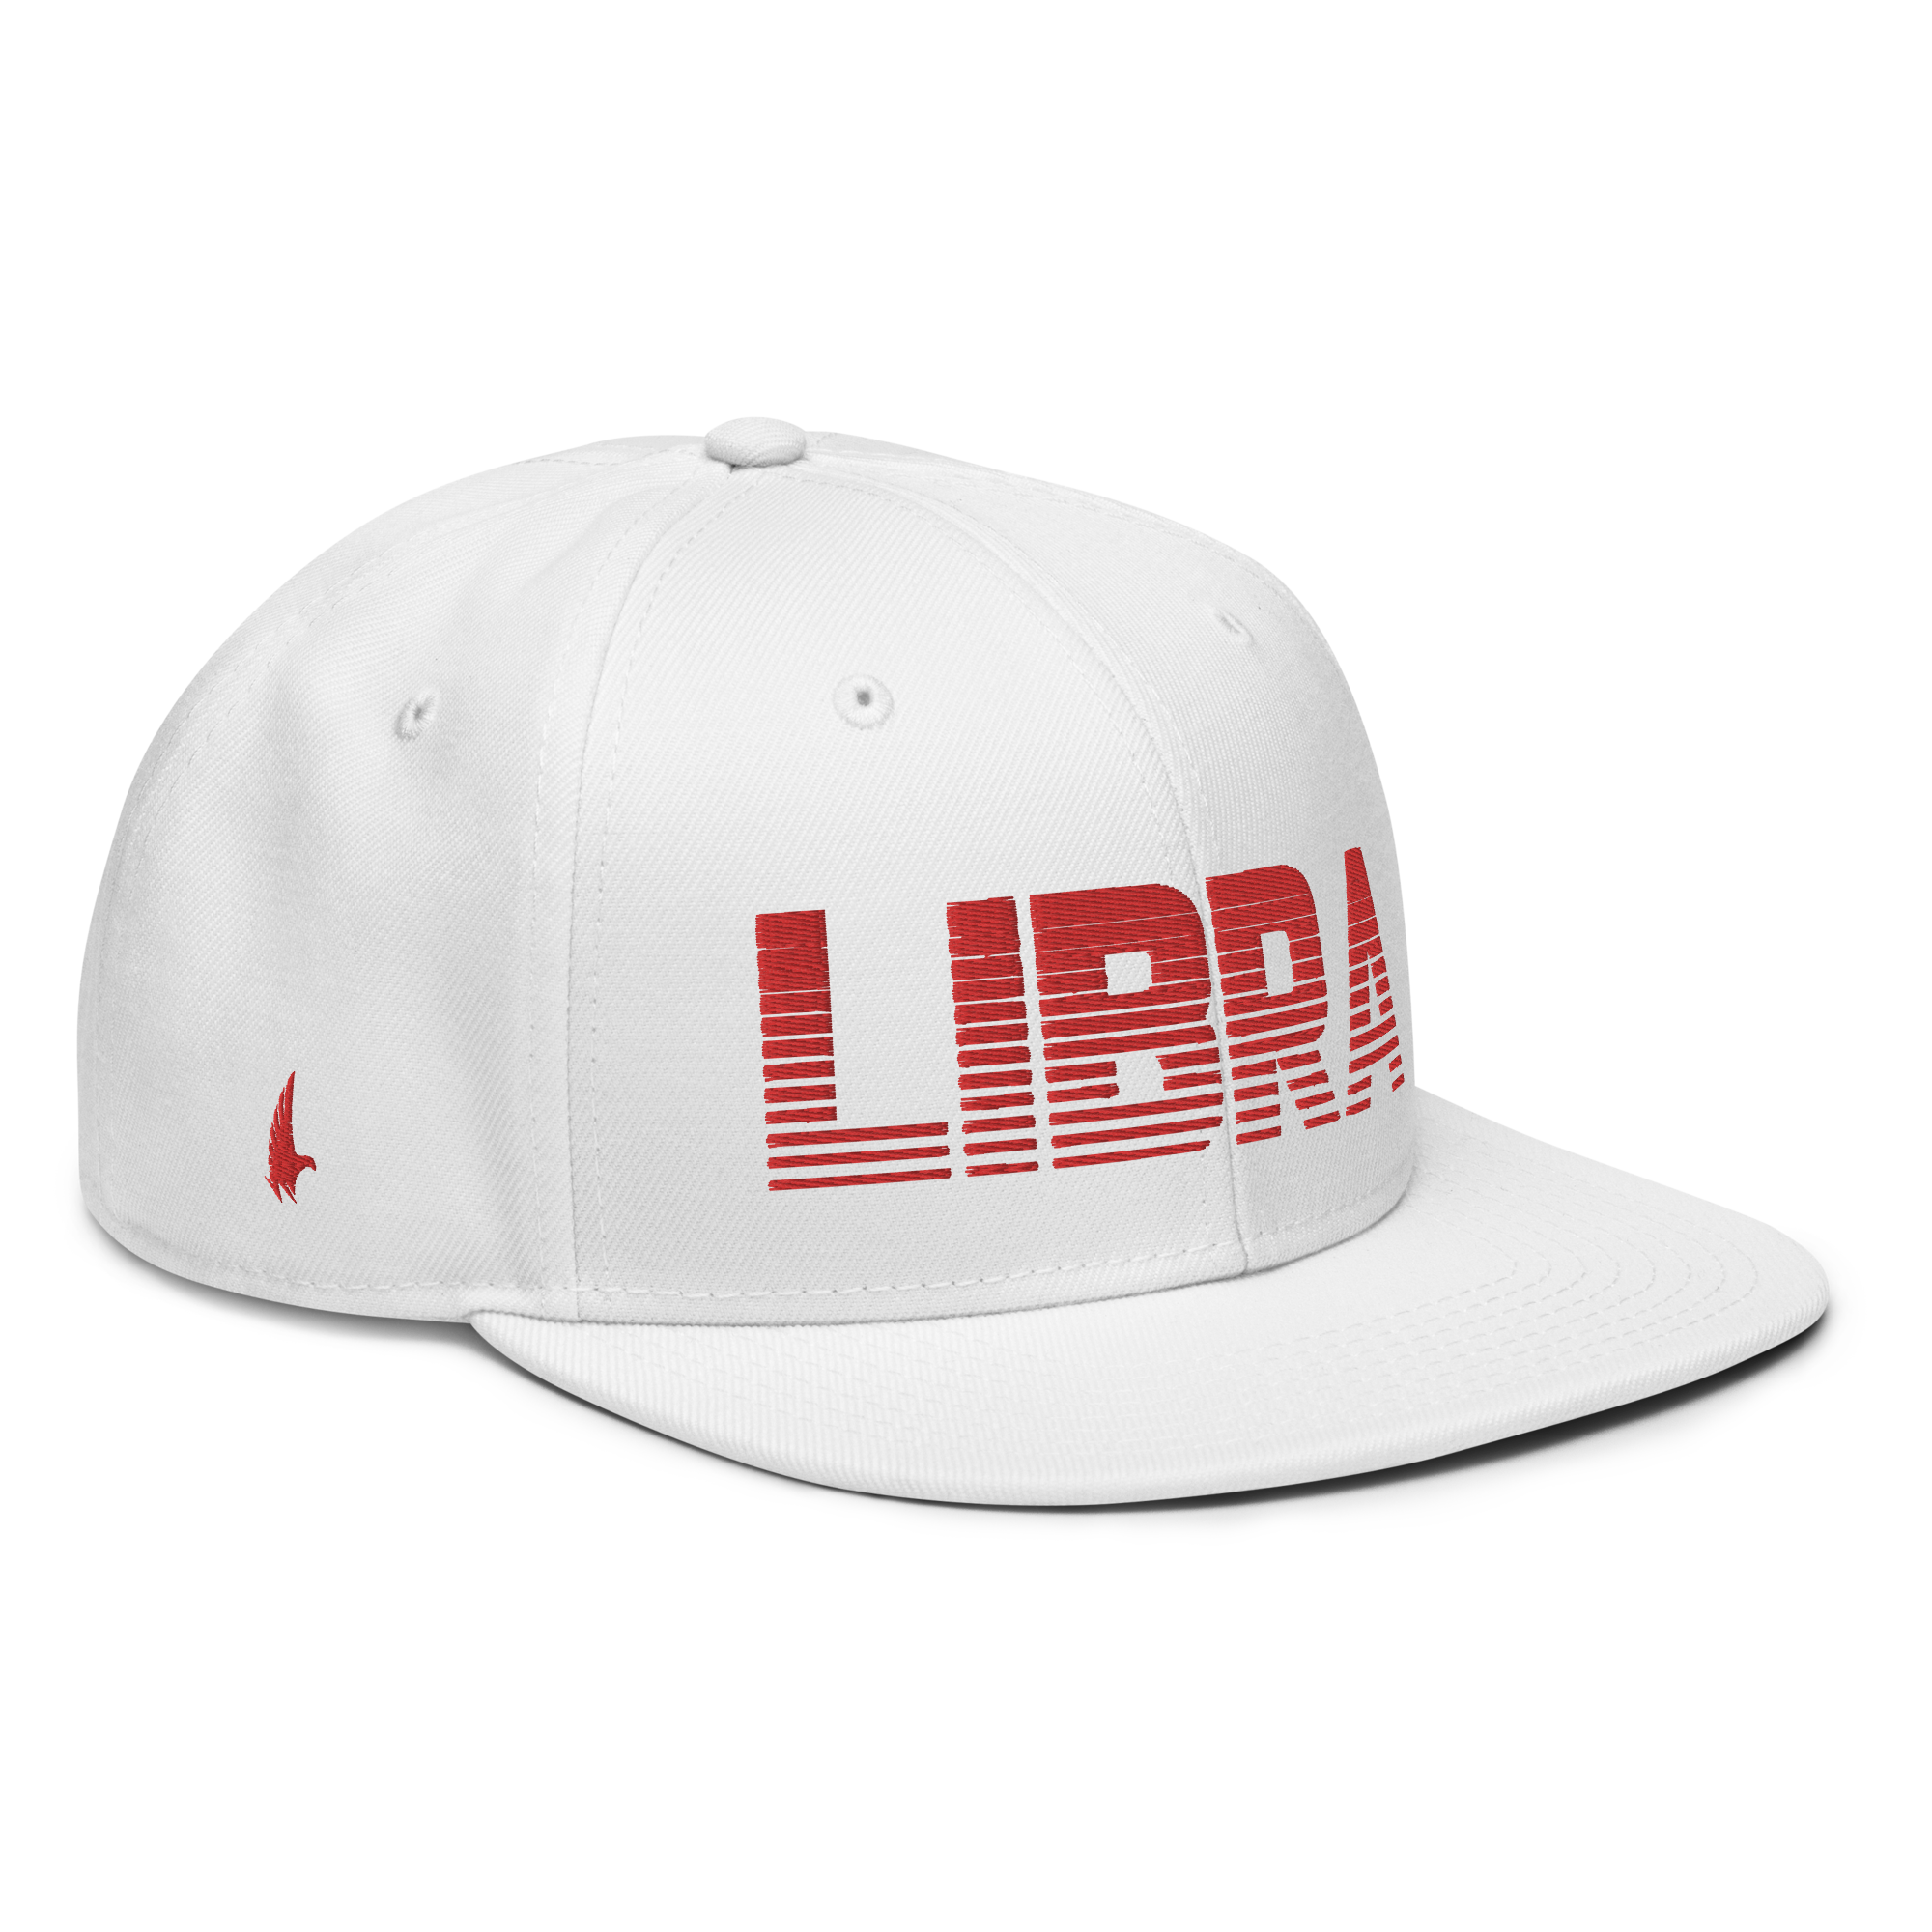 Libra Snapback Hat - White / Red - Loyalty Vibes